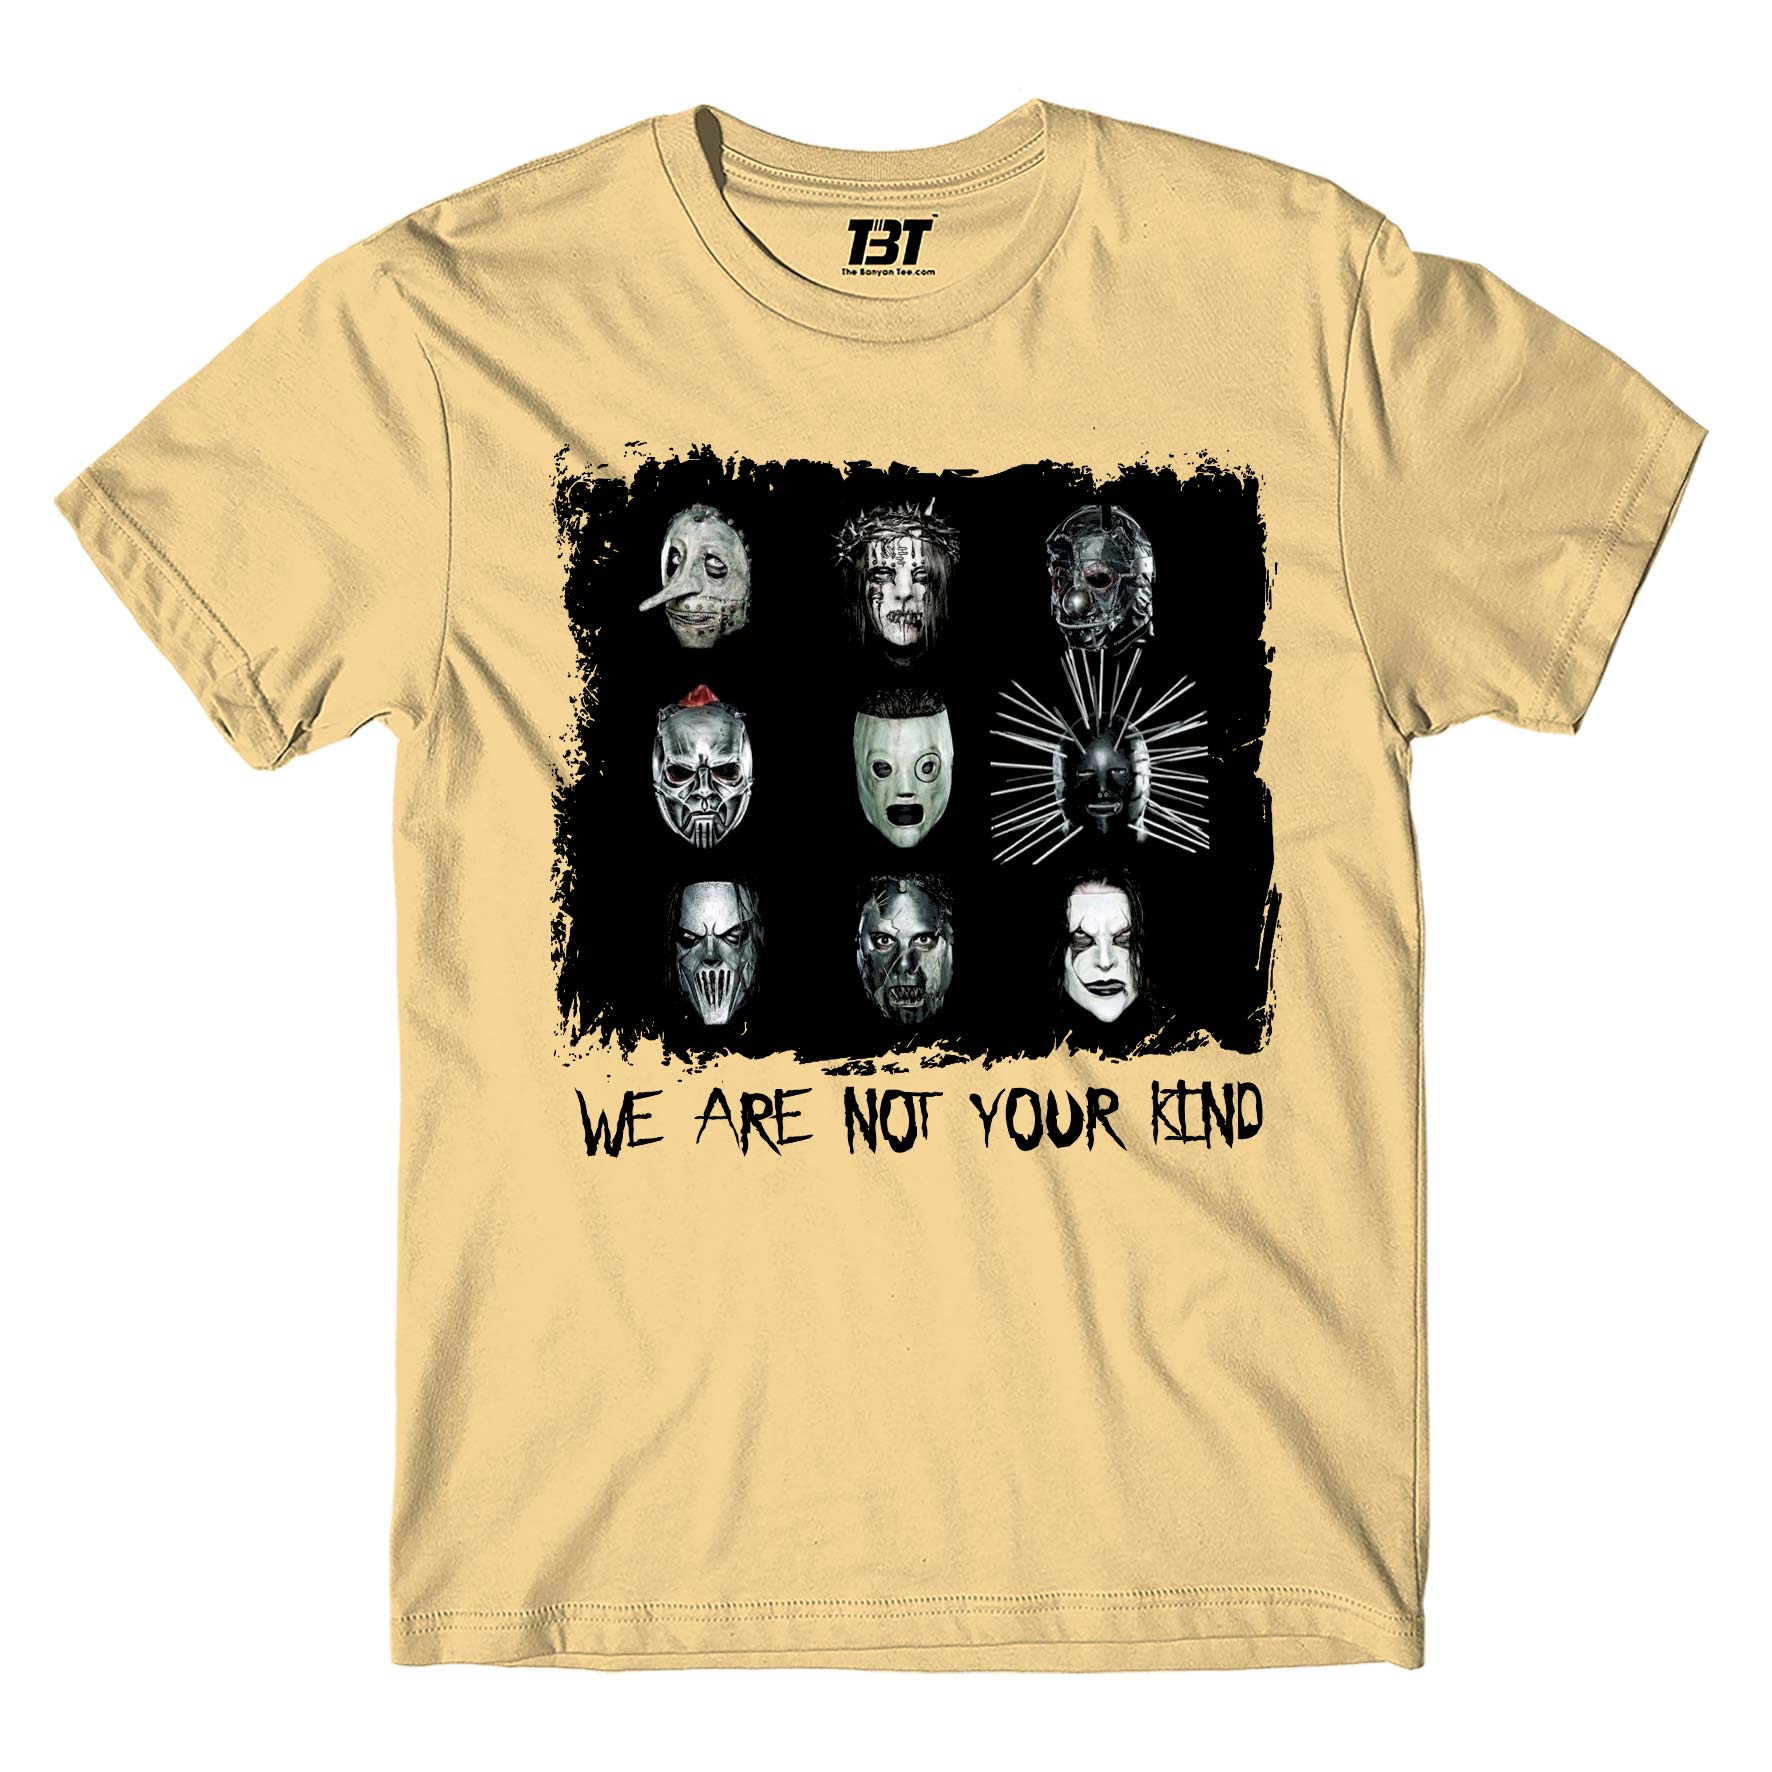 slipknot we are not your kind t-shirt music band buy online usa united states the banyan tee tbt men women girls boys unisex beige